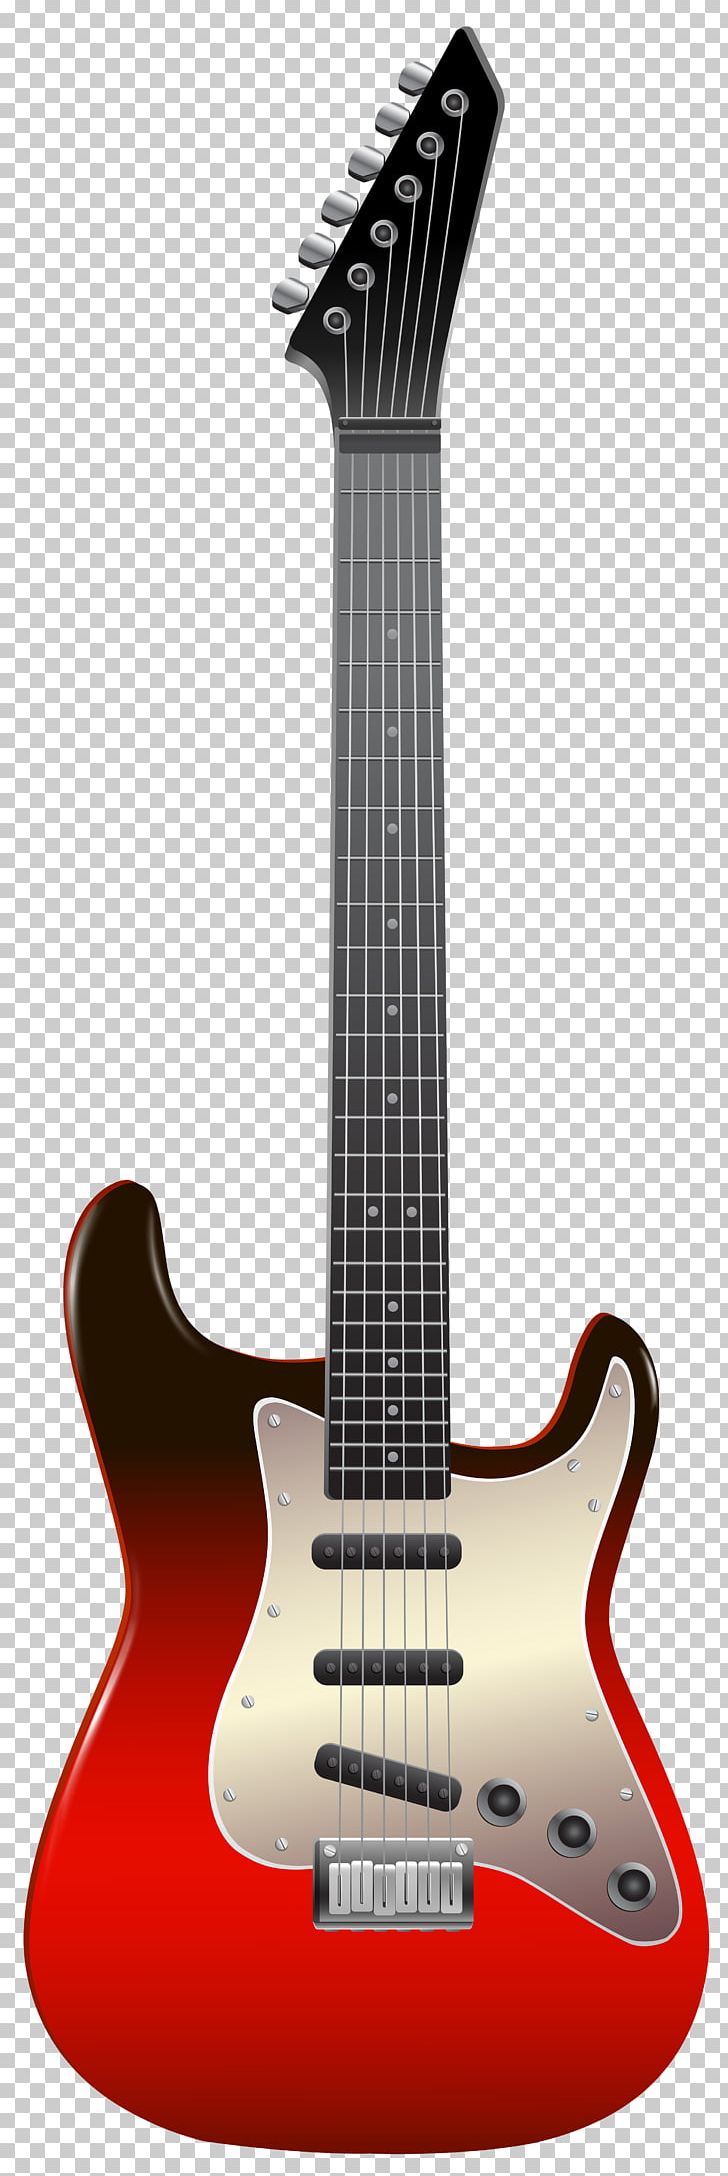 Electric Guitar Musical Instruments Bass Guitar PNG, Clipart, Acoustic Bass Guitar, Classical Guitar, Guitar Accessory, Objects, Plucked String Instruments Free PNG Download